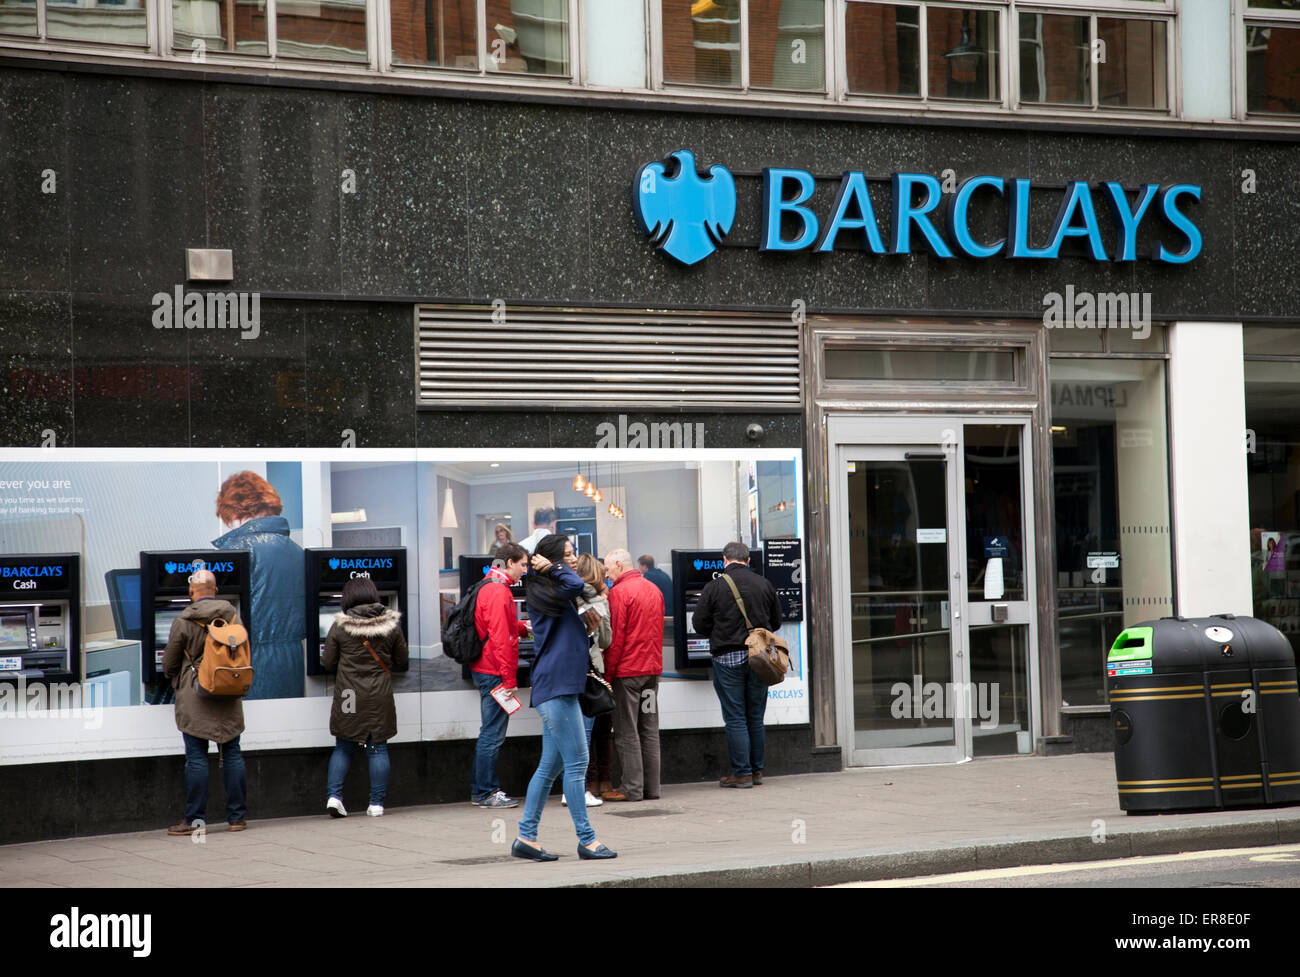 Barclays Cash Point on Charing Cross RD - London UK Stock Photo